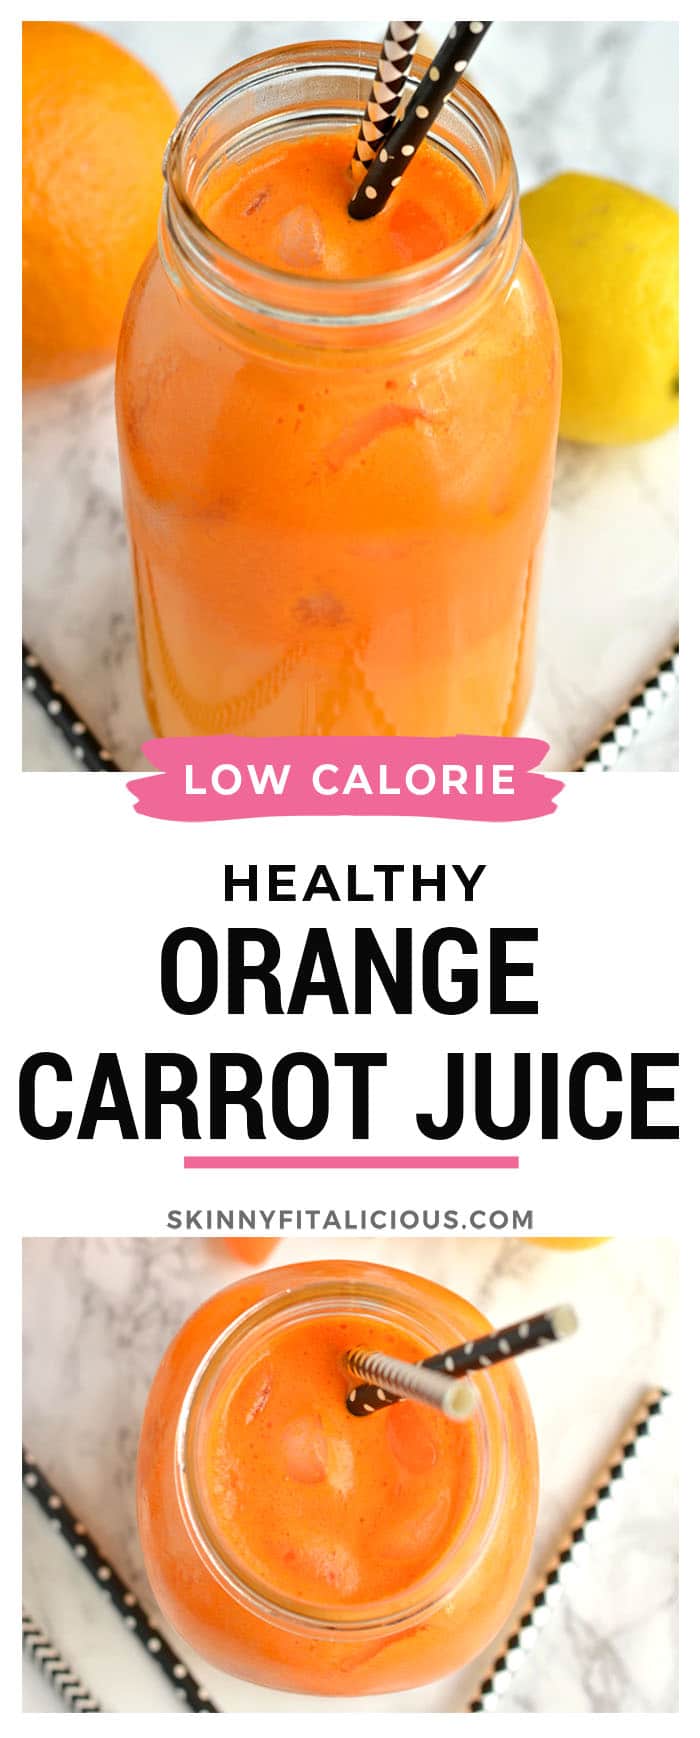 Boost your immune system with an Orange Carrot Ginger Juice packed with healthy citrus and carrots. This juice has tons of flavor, a zing of tartness and is full of nourishment. The perfect juice to spring clean your diet!